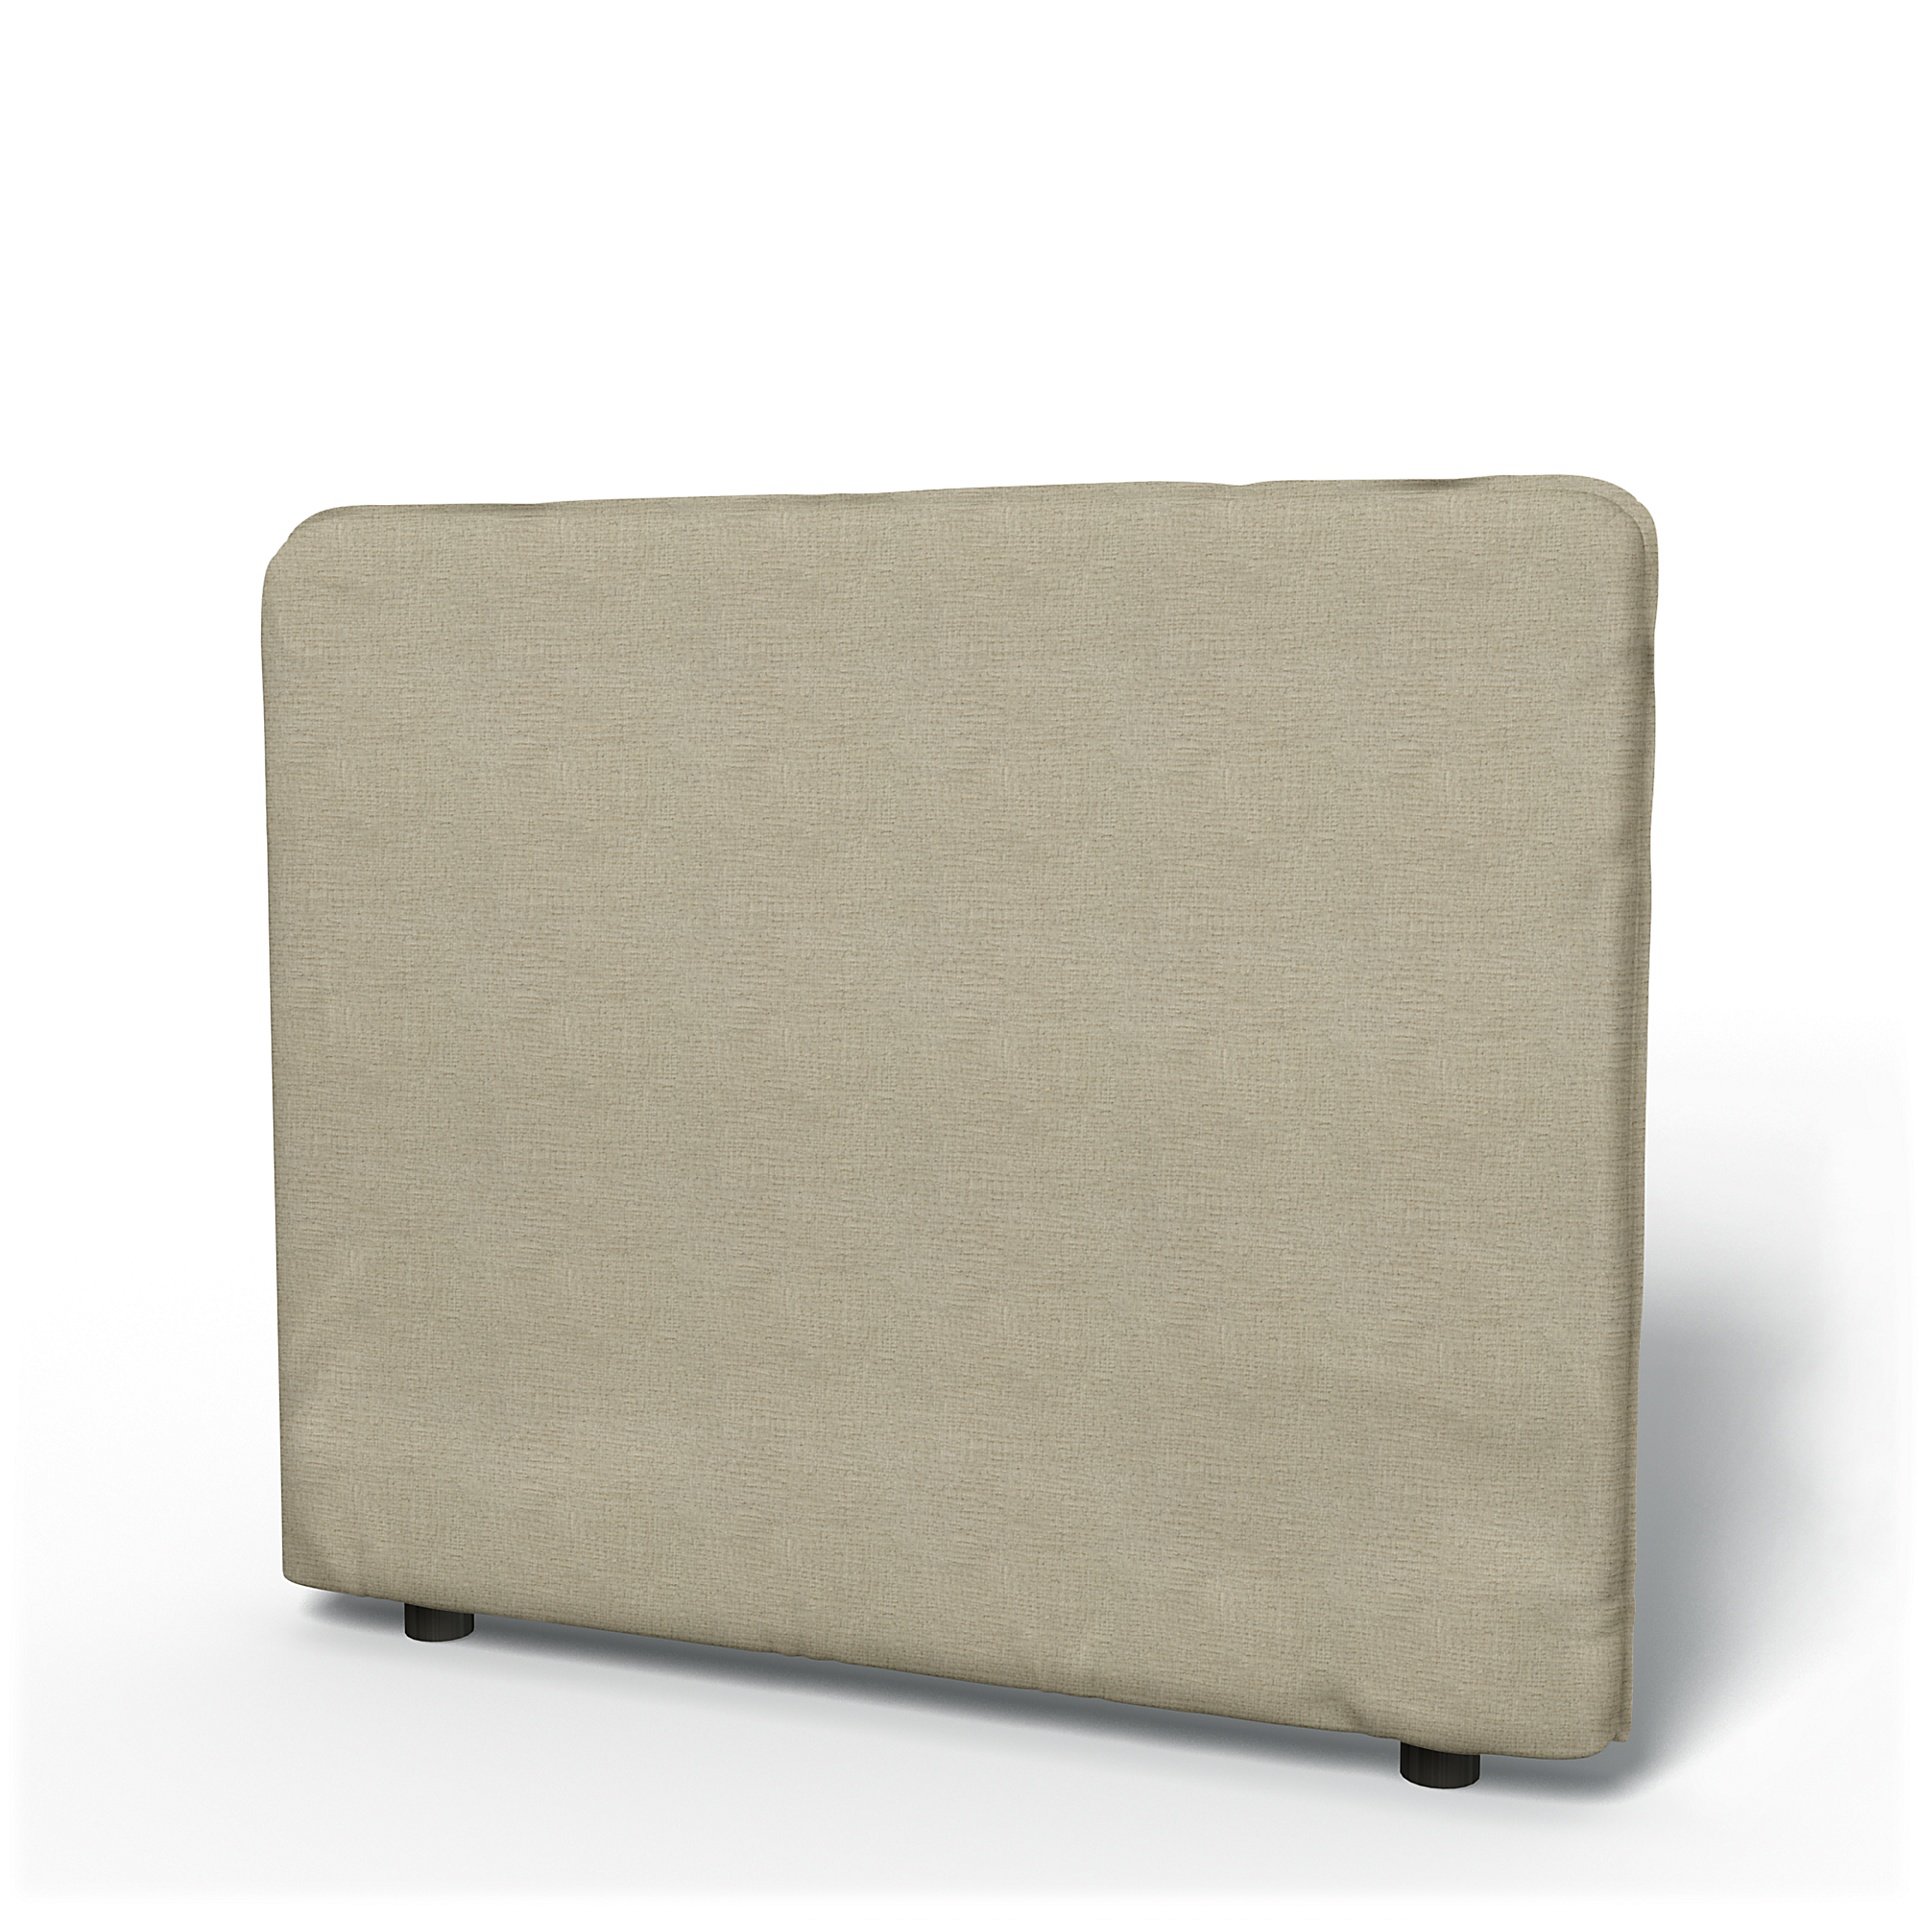 IKEA - Vallentuna Low Backrest Cover 100x80cm 39x32in, Soft White, Boucle & Texture - Bemz